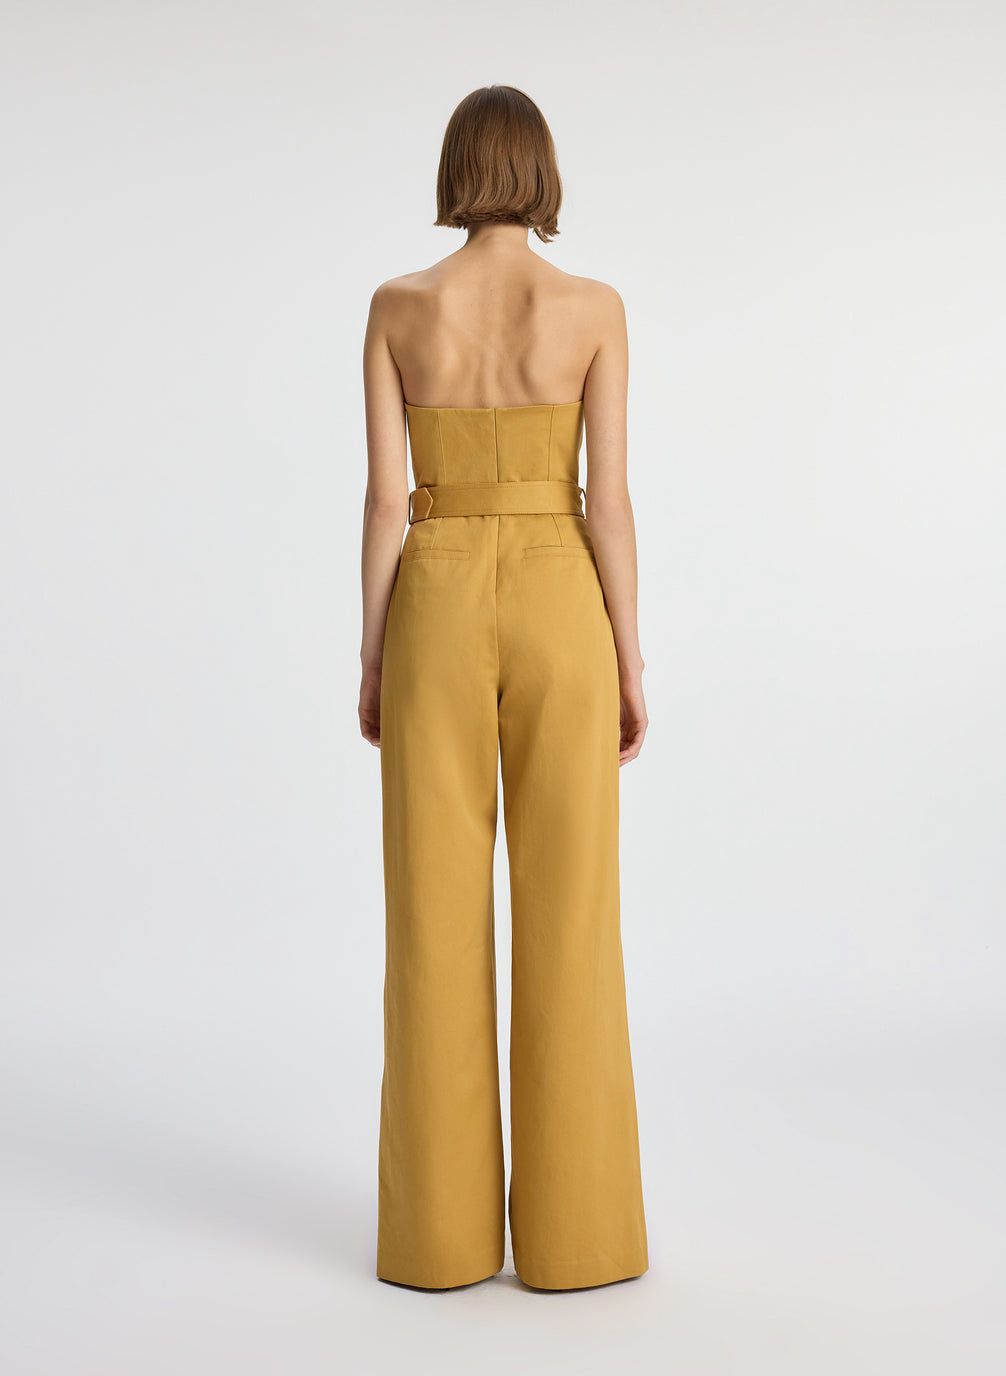 back view of woman wearing tan jumpsuit